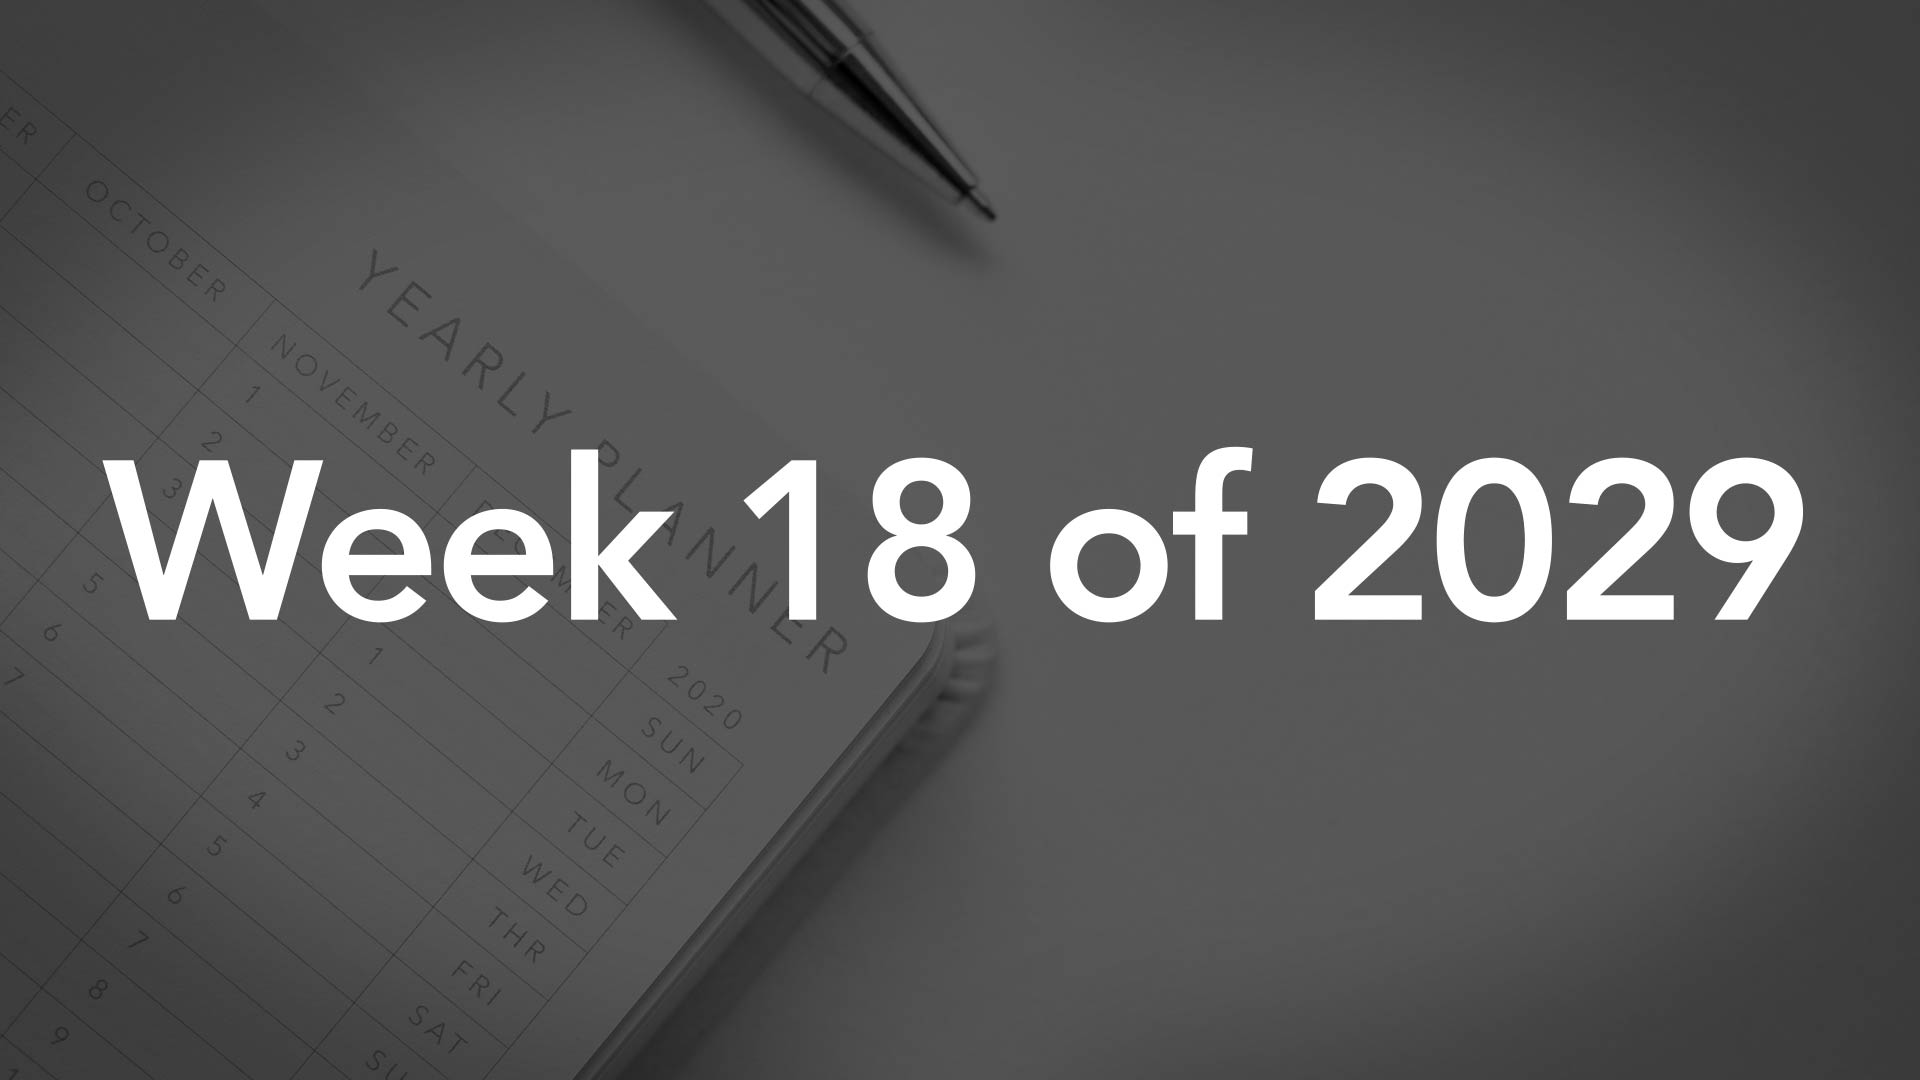 Title Image for Week 18 of 2029